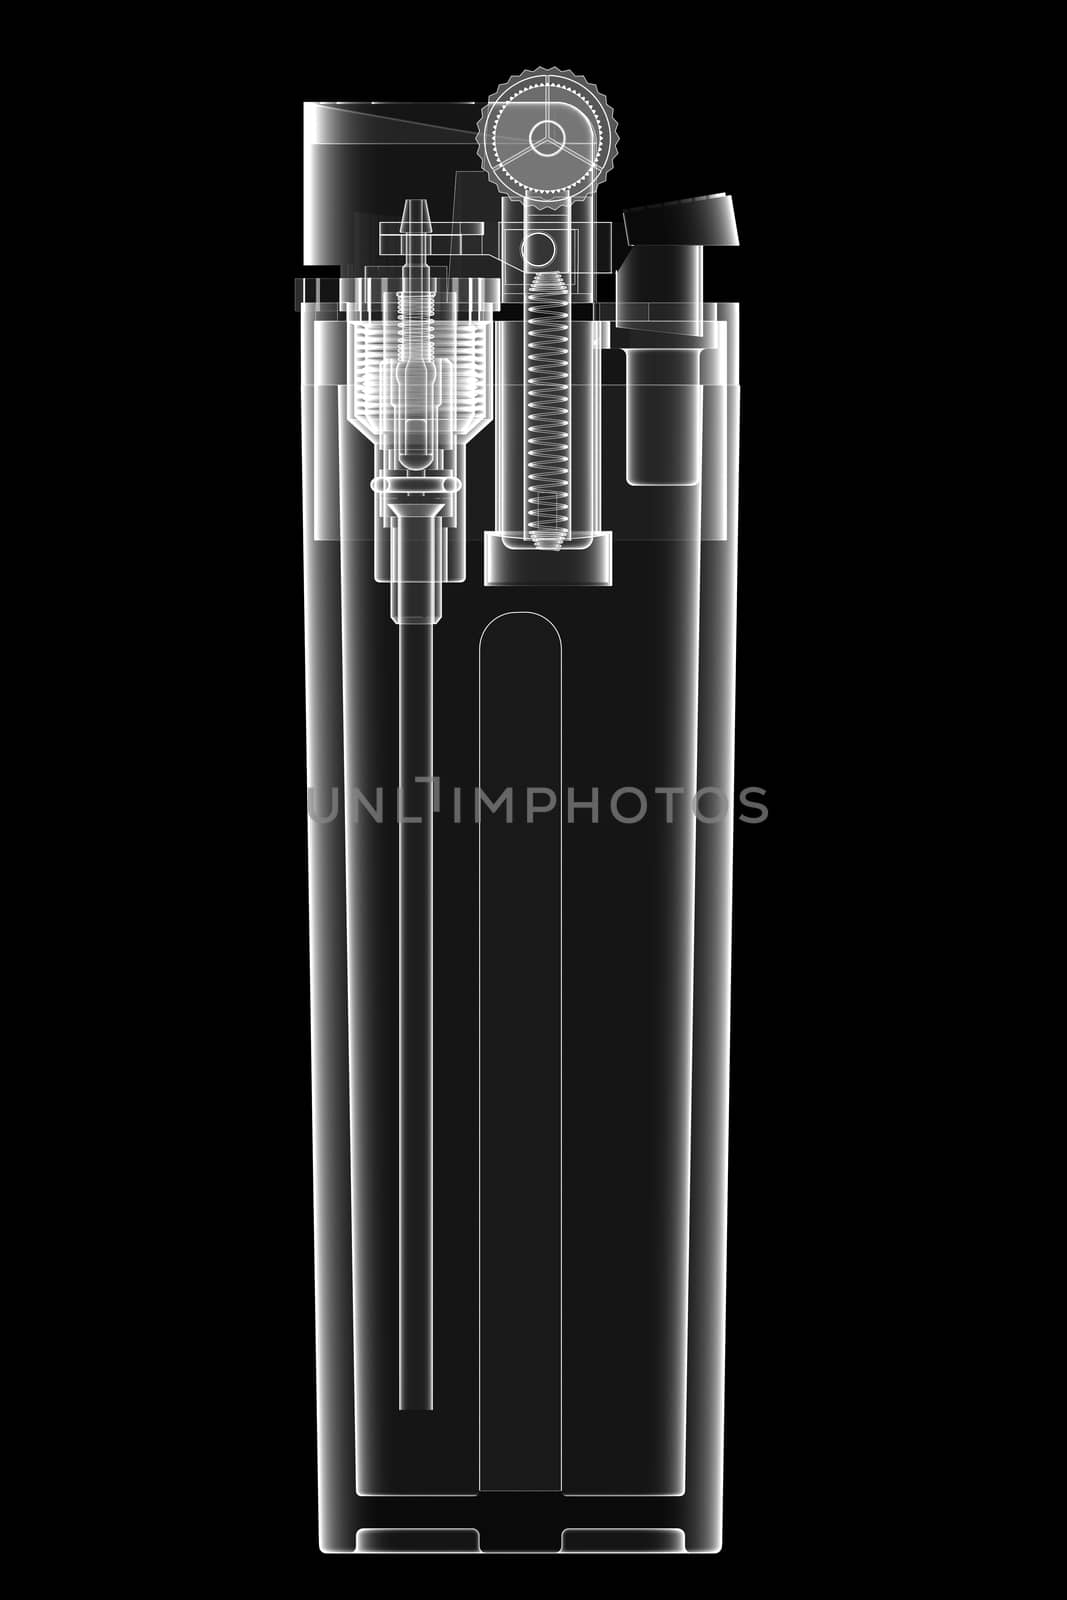 X-ray view of lighter isolated on black background. High resolution 3D image